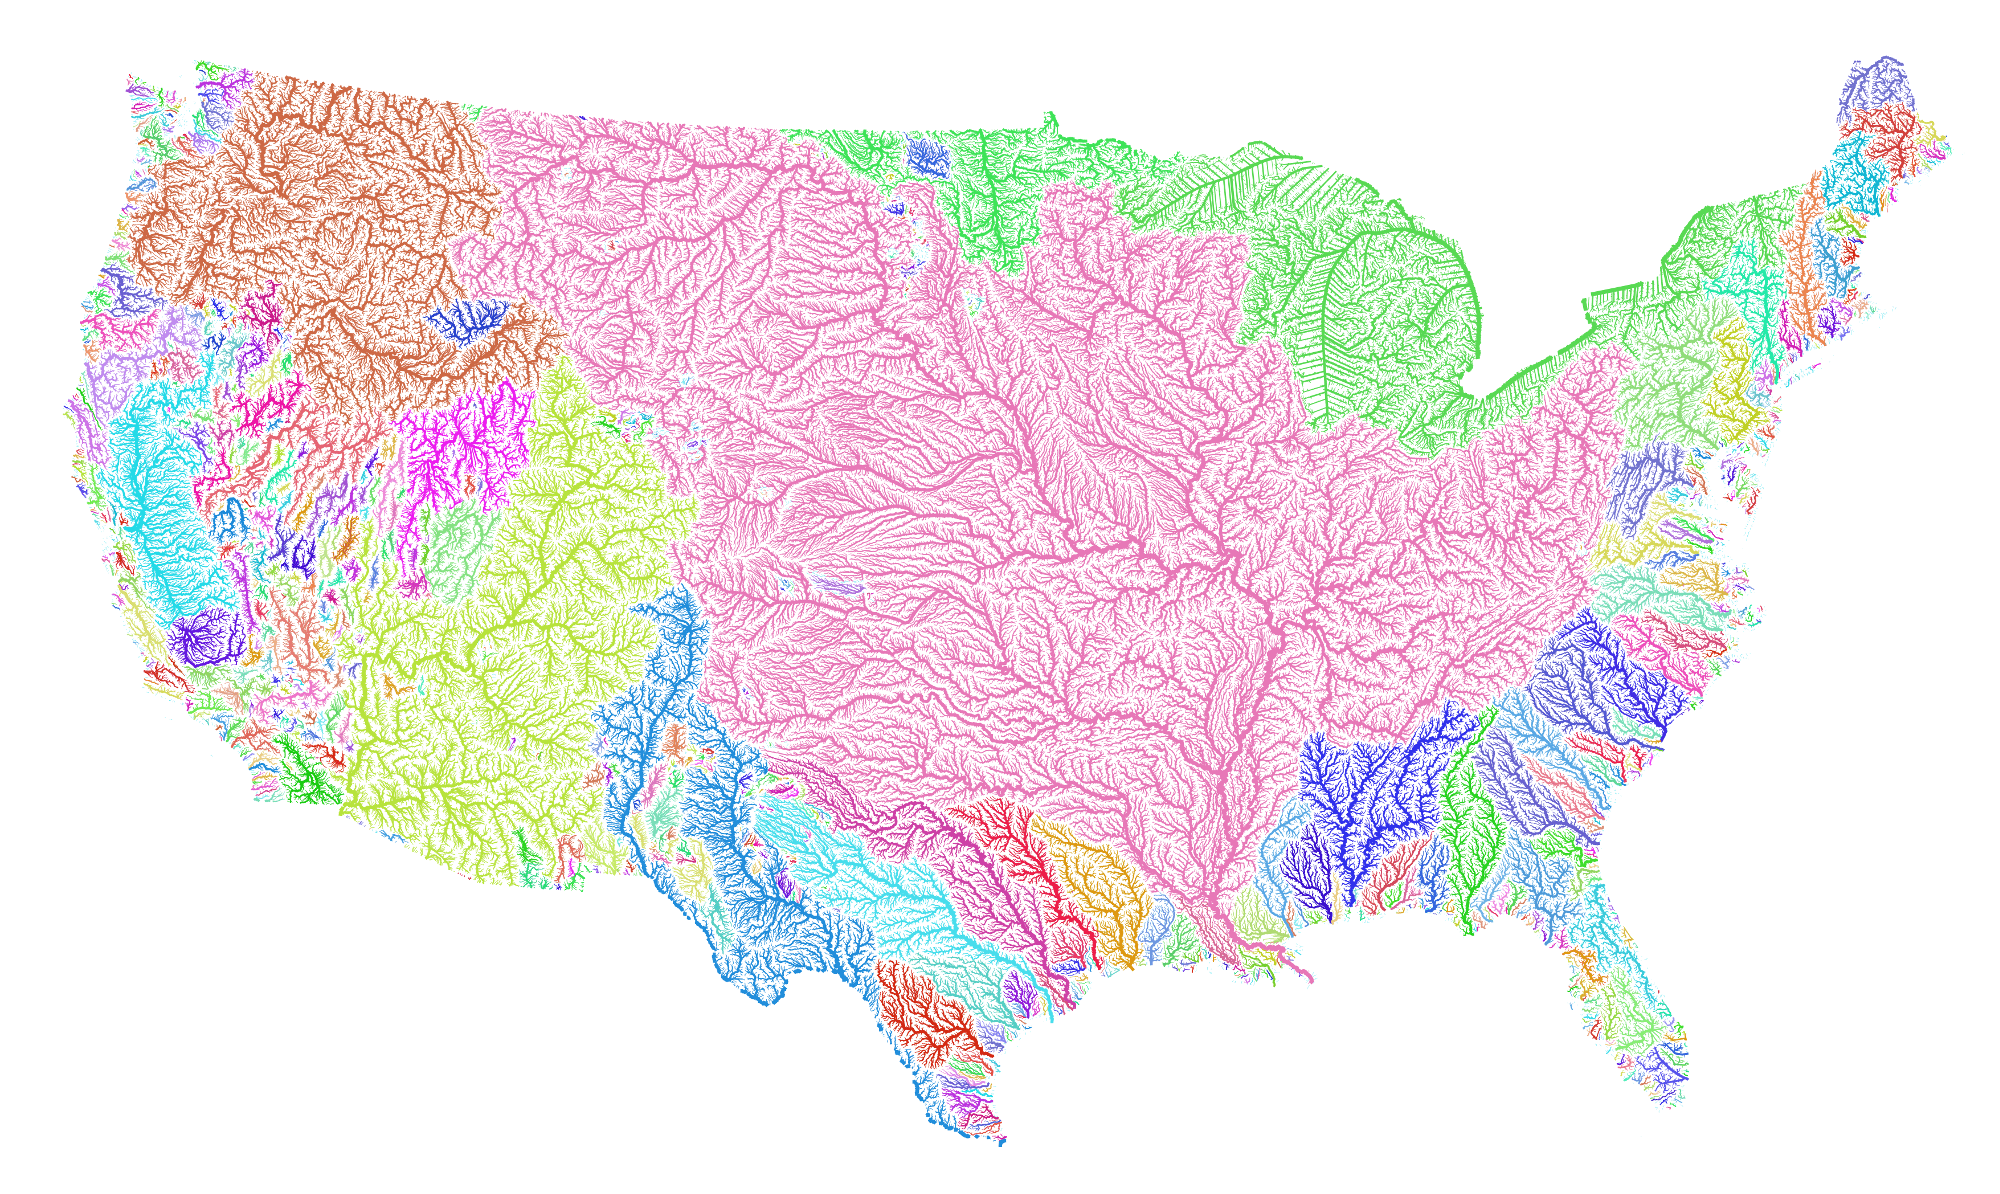 Map of every river in the United States, each depicted in a different color. Map created by Robert Szucs.